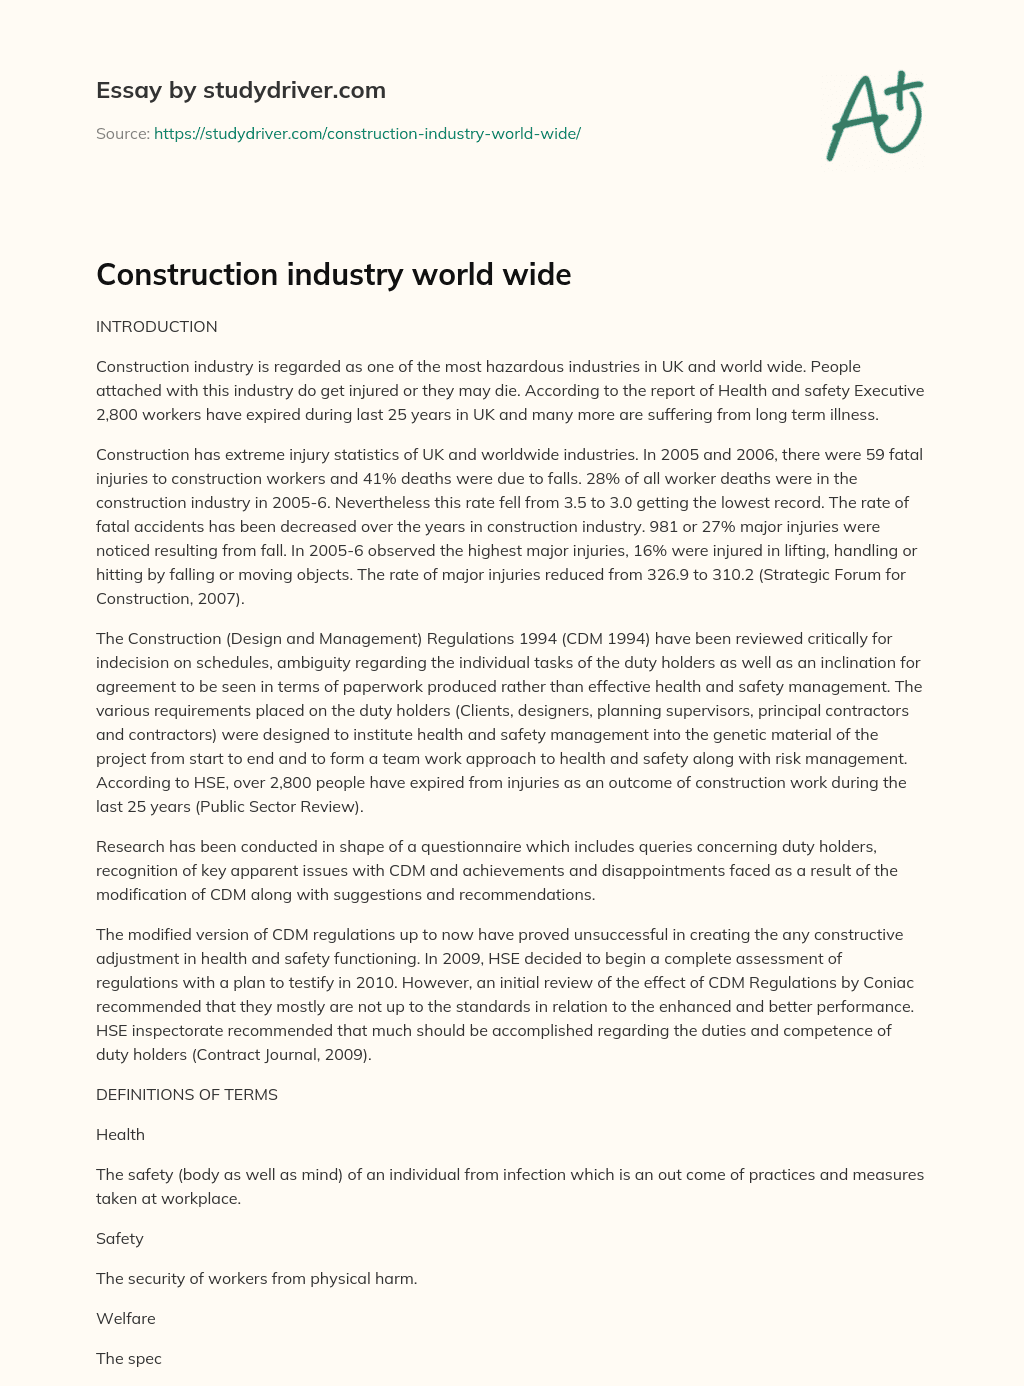 Construction Industry World Wide essay